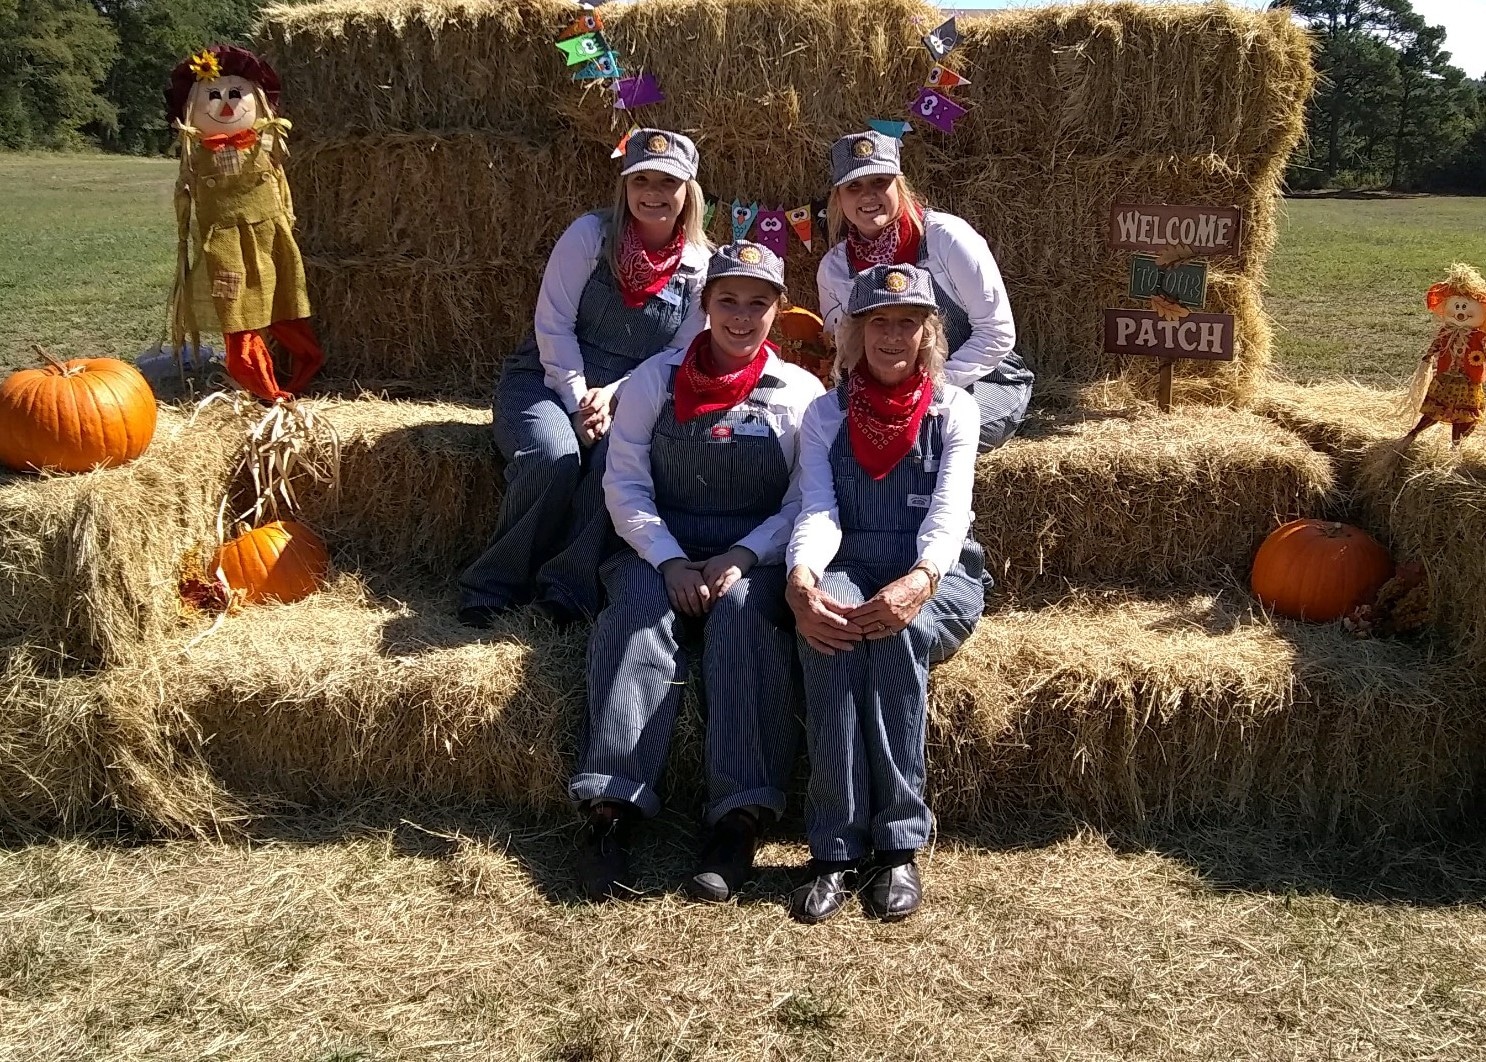 hay stacked 4 people sitting on the hay with railroad overalls, red bandanas and billed caps-several pumpkins and scarecrows